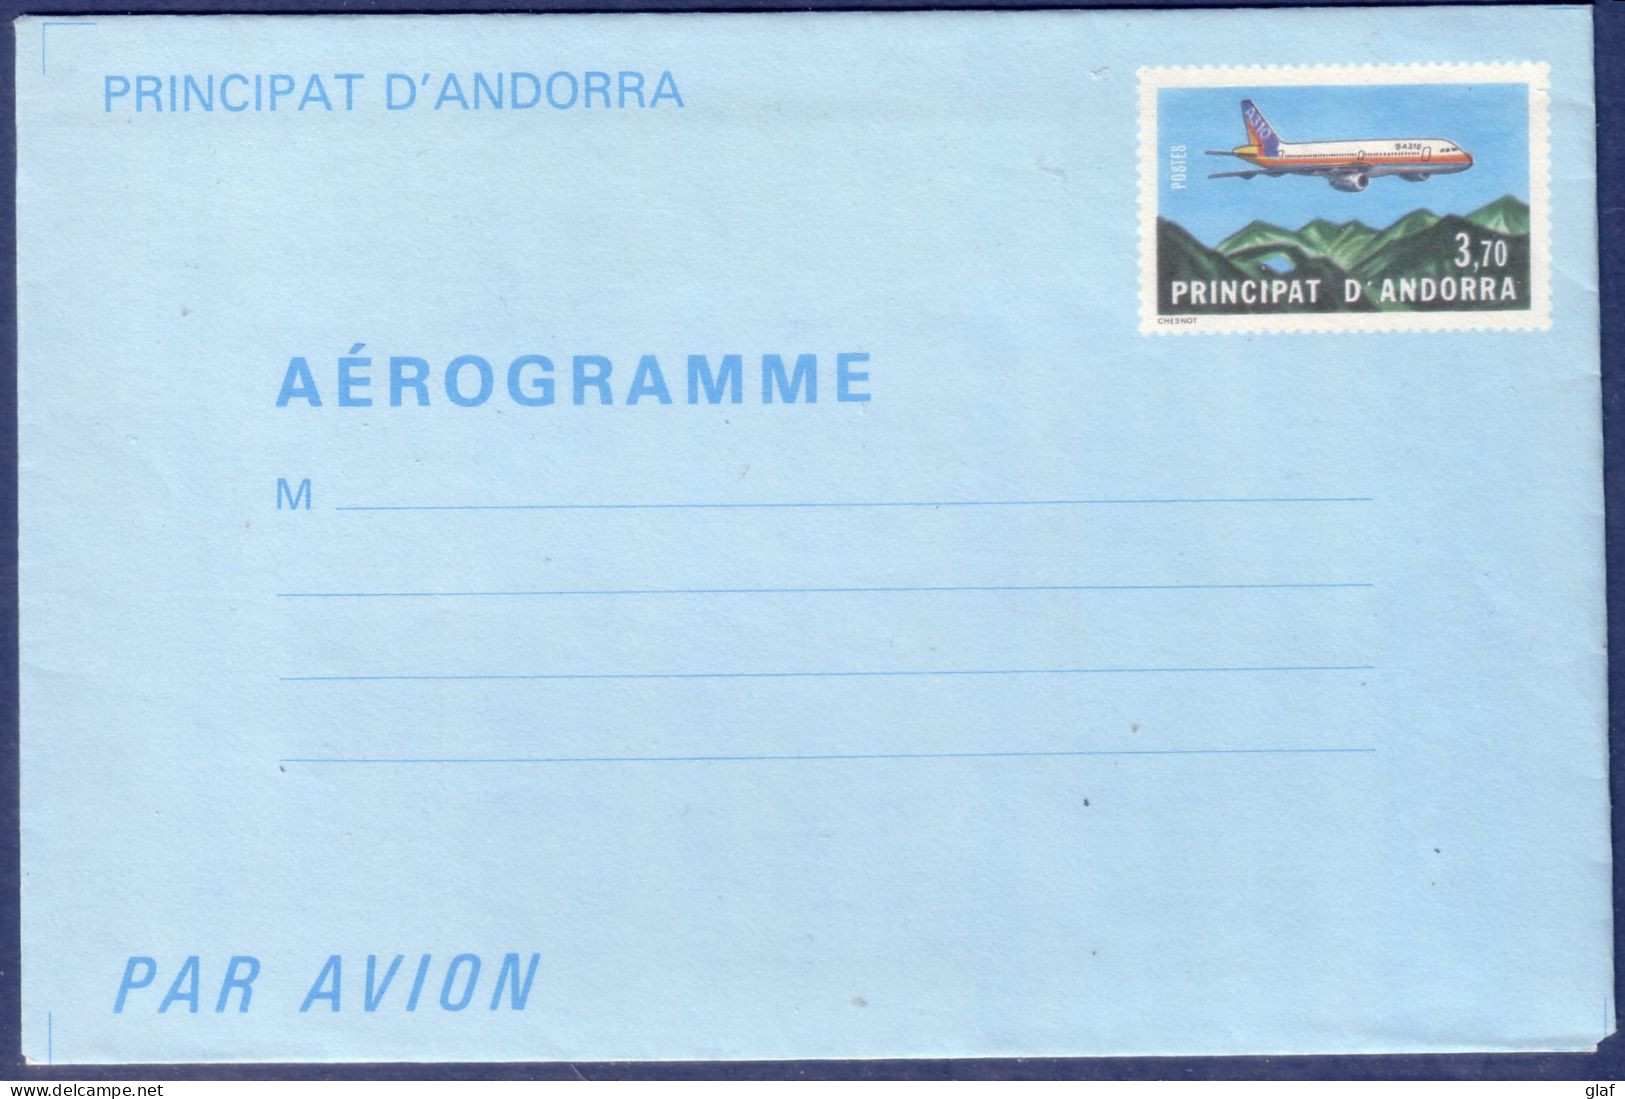 Aérogramme Andorre 3,70 "Airbus A310" - Neuf - Stamped Stationery & Prêts-à-poster